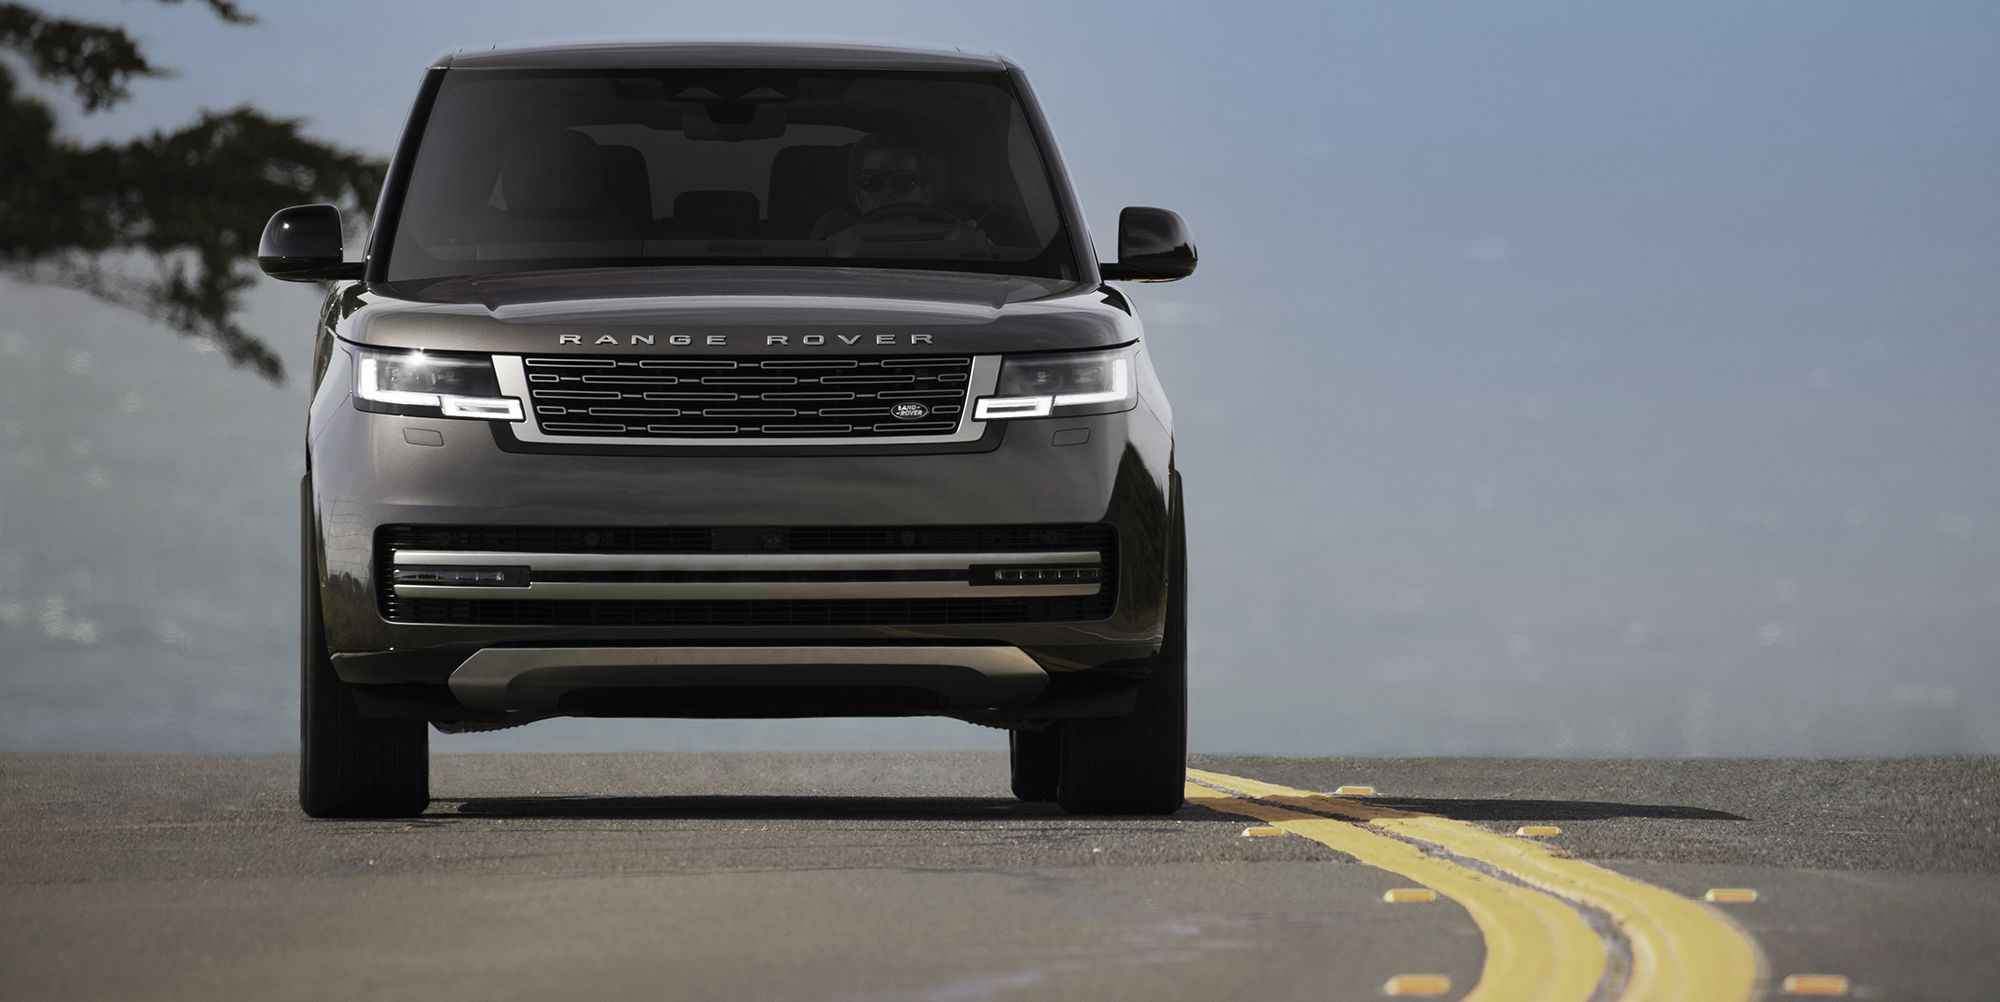 The New Range Rover Is Fabulous